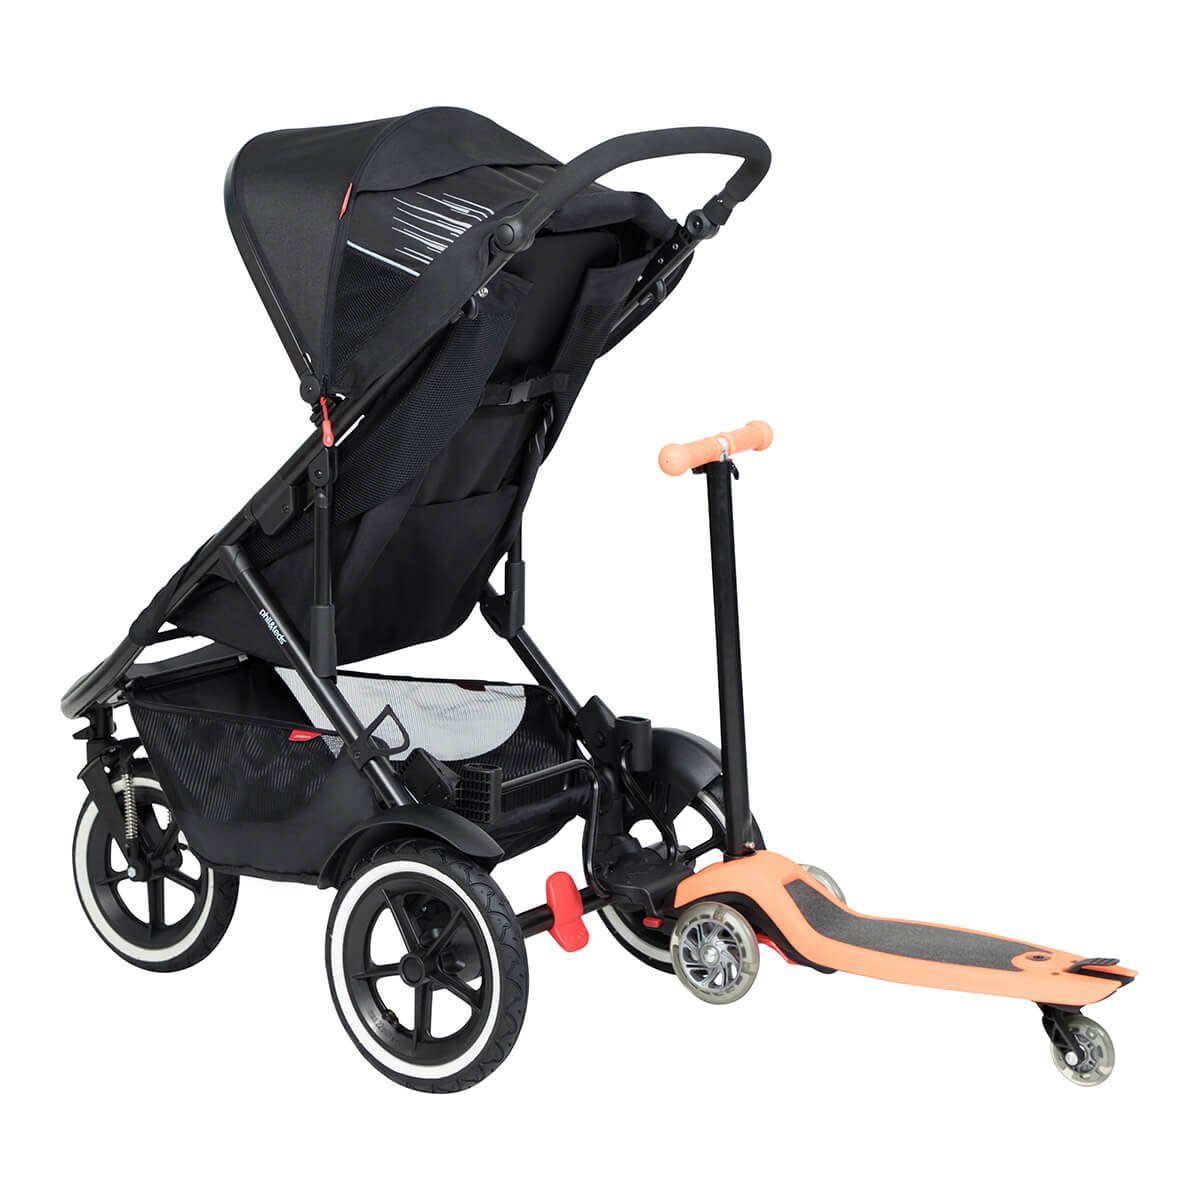 https://cdn.accentuate.io/4509528653912/19272668348504/philteds-sport-buggy-with-freerider-stroller-board-in-rear-v1626484553038.jpg?1200x1200